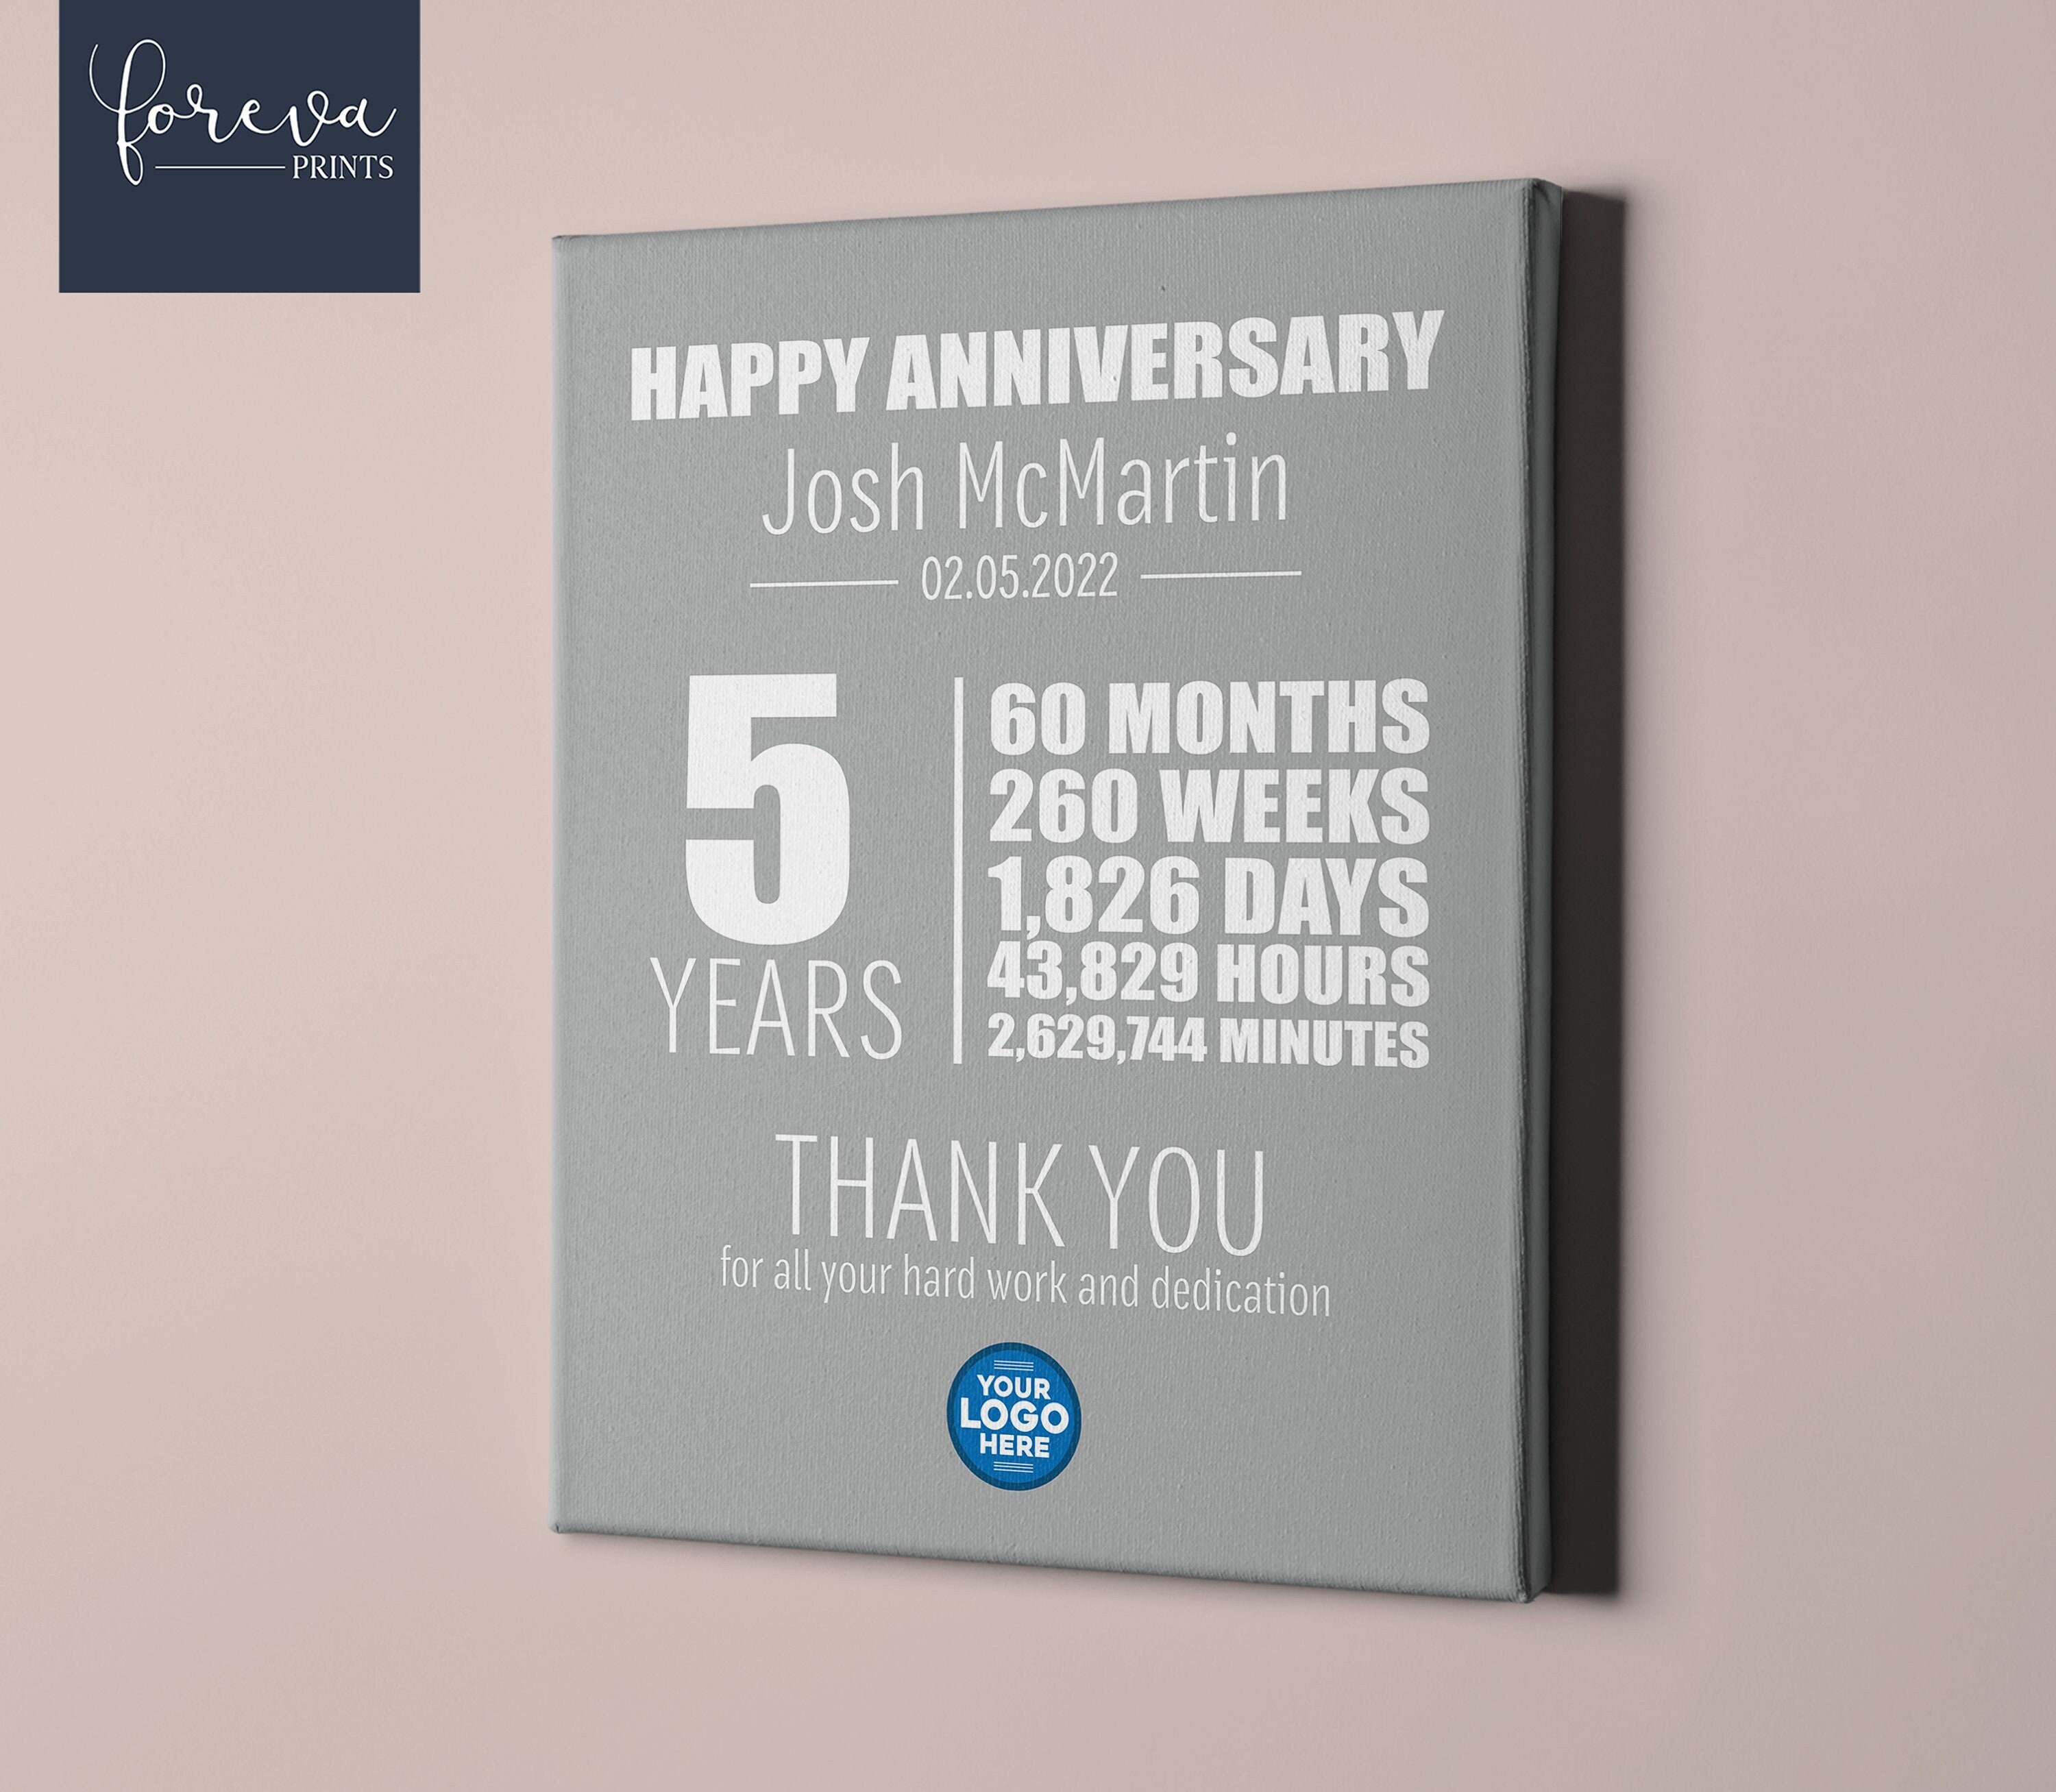 5th Work Anniversary Gift  Corporate Gifts for Employees — Simple &  Sentimental